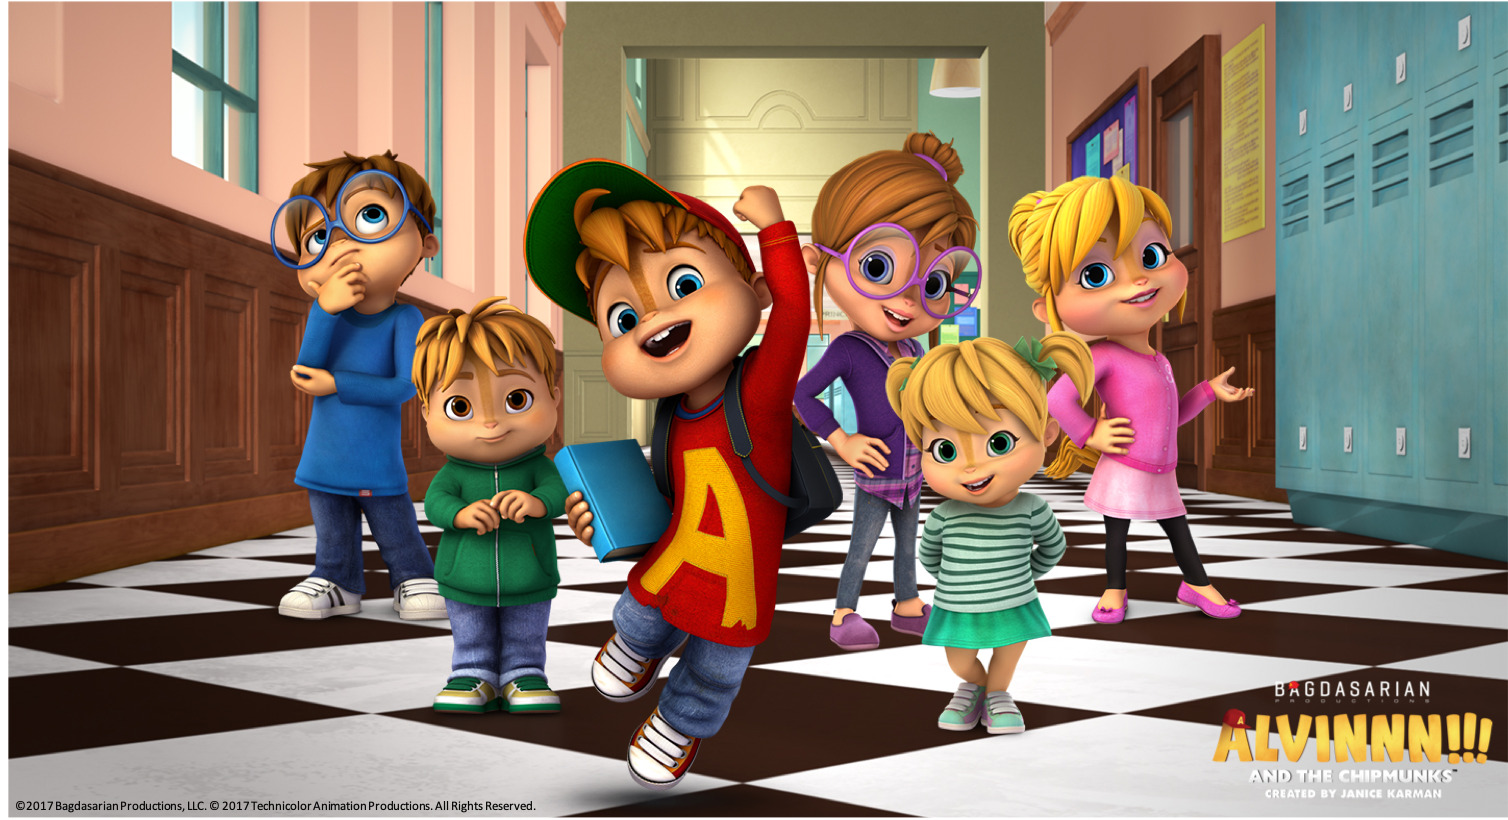 Bagdasarian Productions' ALVINNN!!! & the Chipmunks to be broadcast in  China. Deal secured by PGS Entertainment. – PGS Entertainment